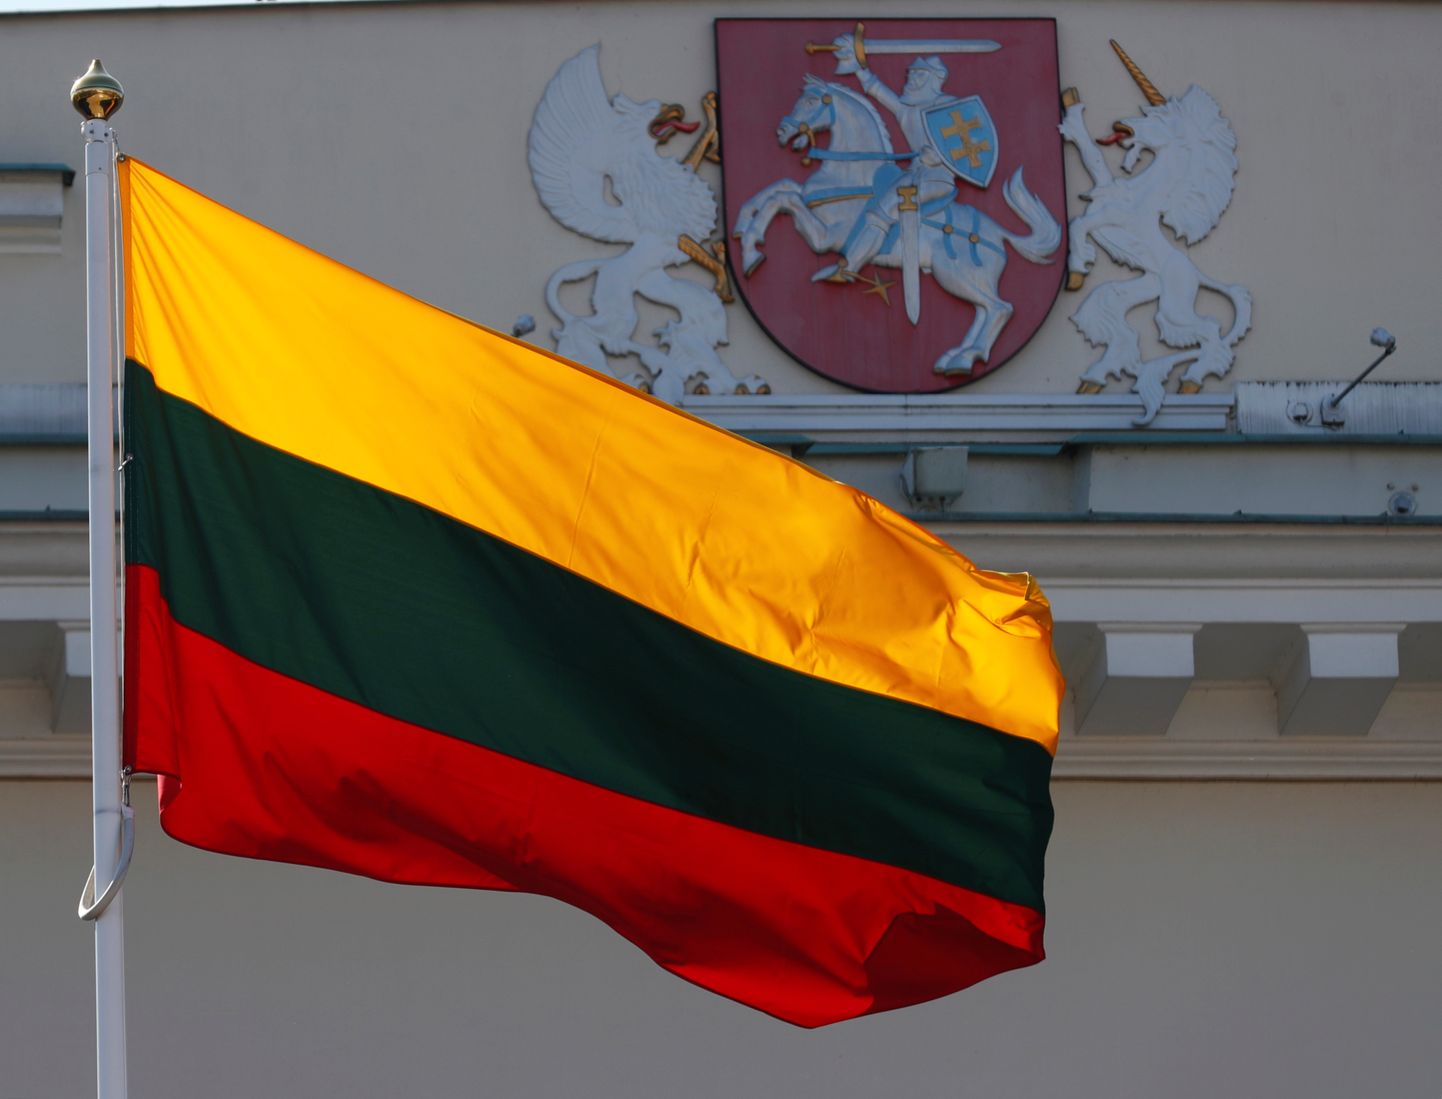 Lithuanian flag flutters during the celebration of the 15th anniversary of Lithuania's membership in NATO in Vilnius, Lithuania March 30, 2019. REUTERS/Ints Kalnins